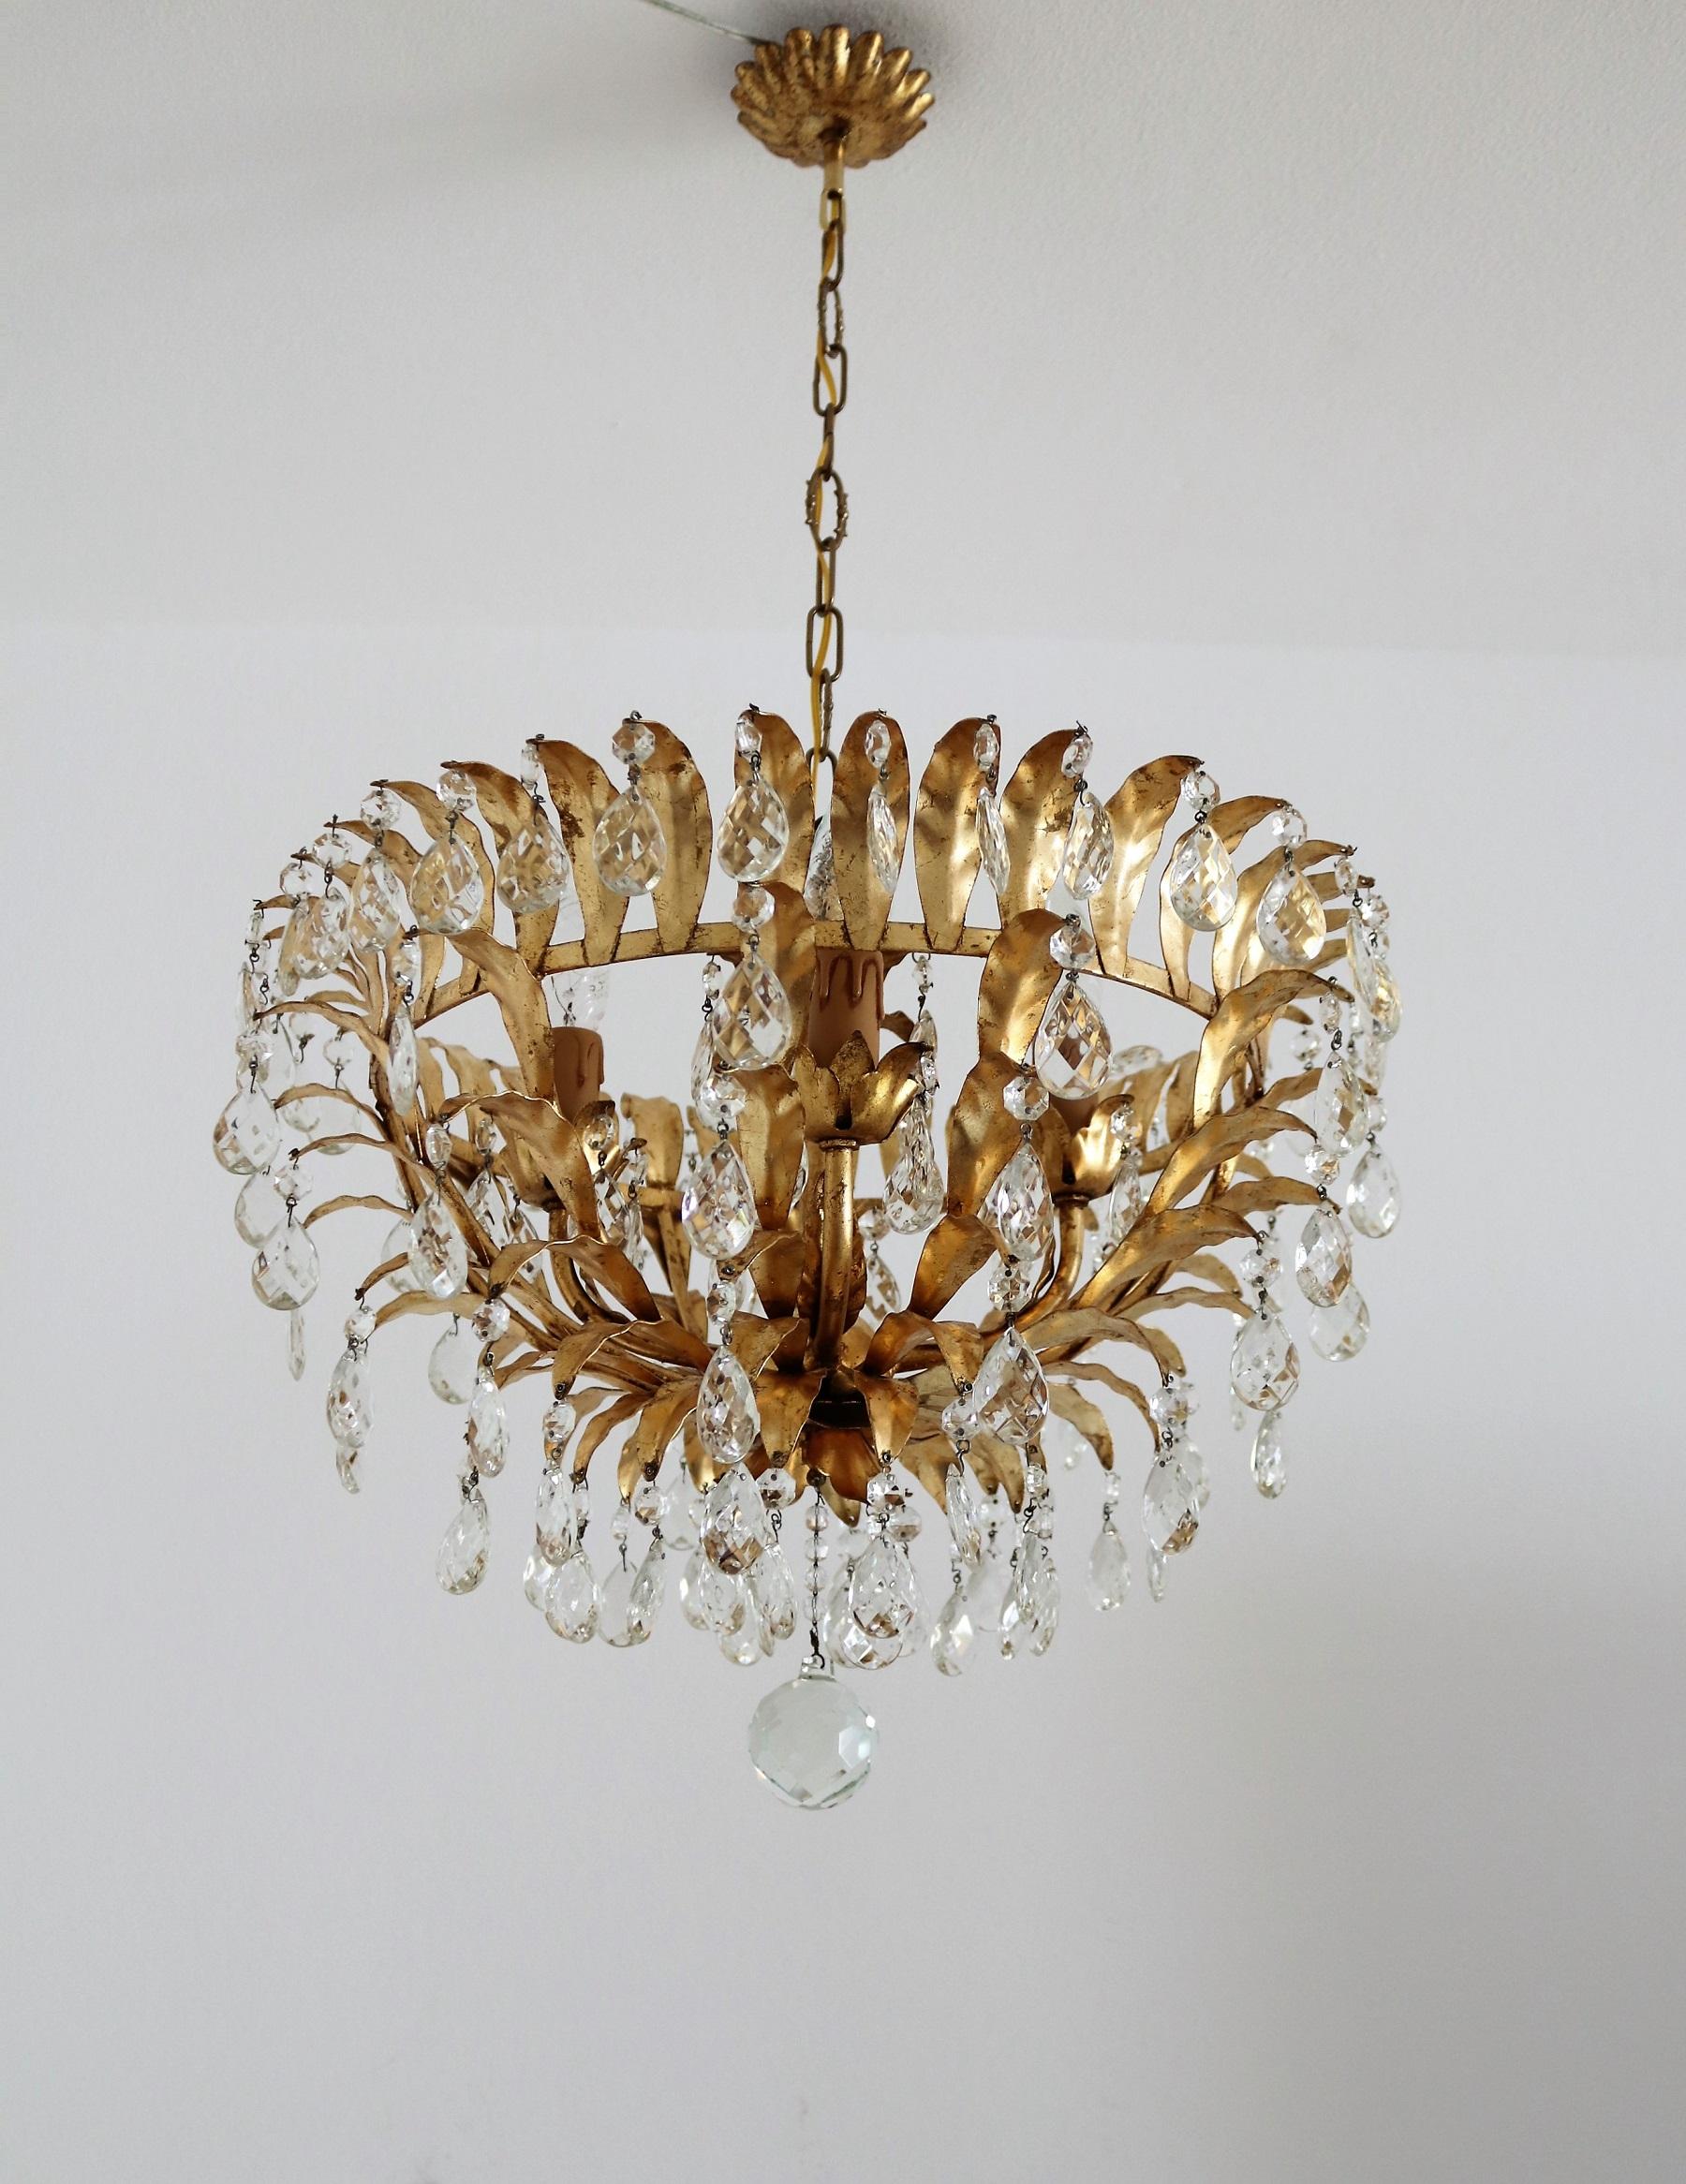 Italian Midcentury Gilt Crystal Flush Mount Chandelier with Leafes by Banci  6